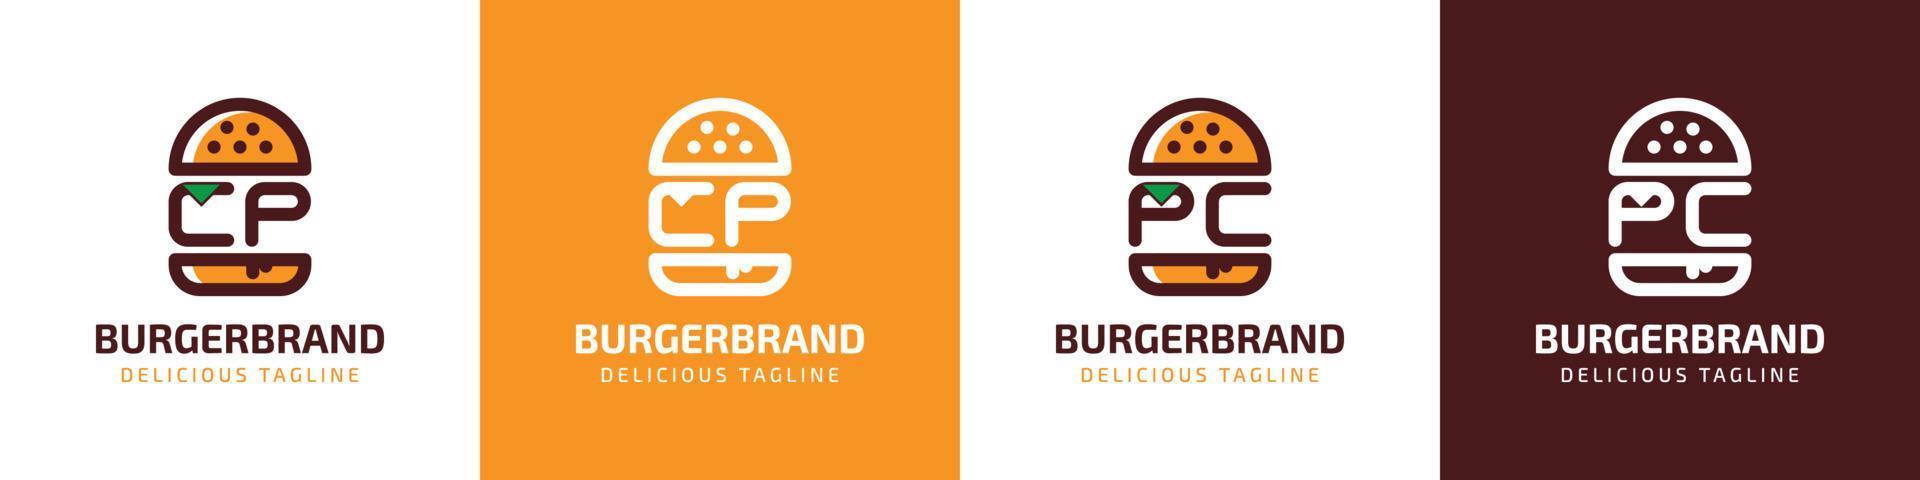 Letter CP and PC Burger Logo, suitable for any business related to burger with CP or PC initials. vector